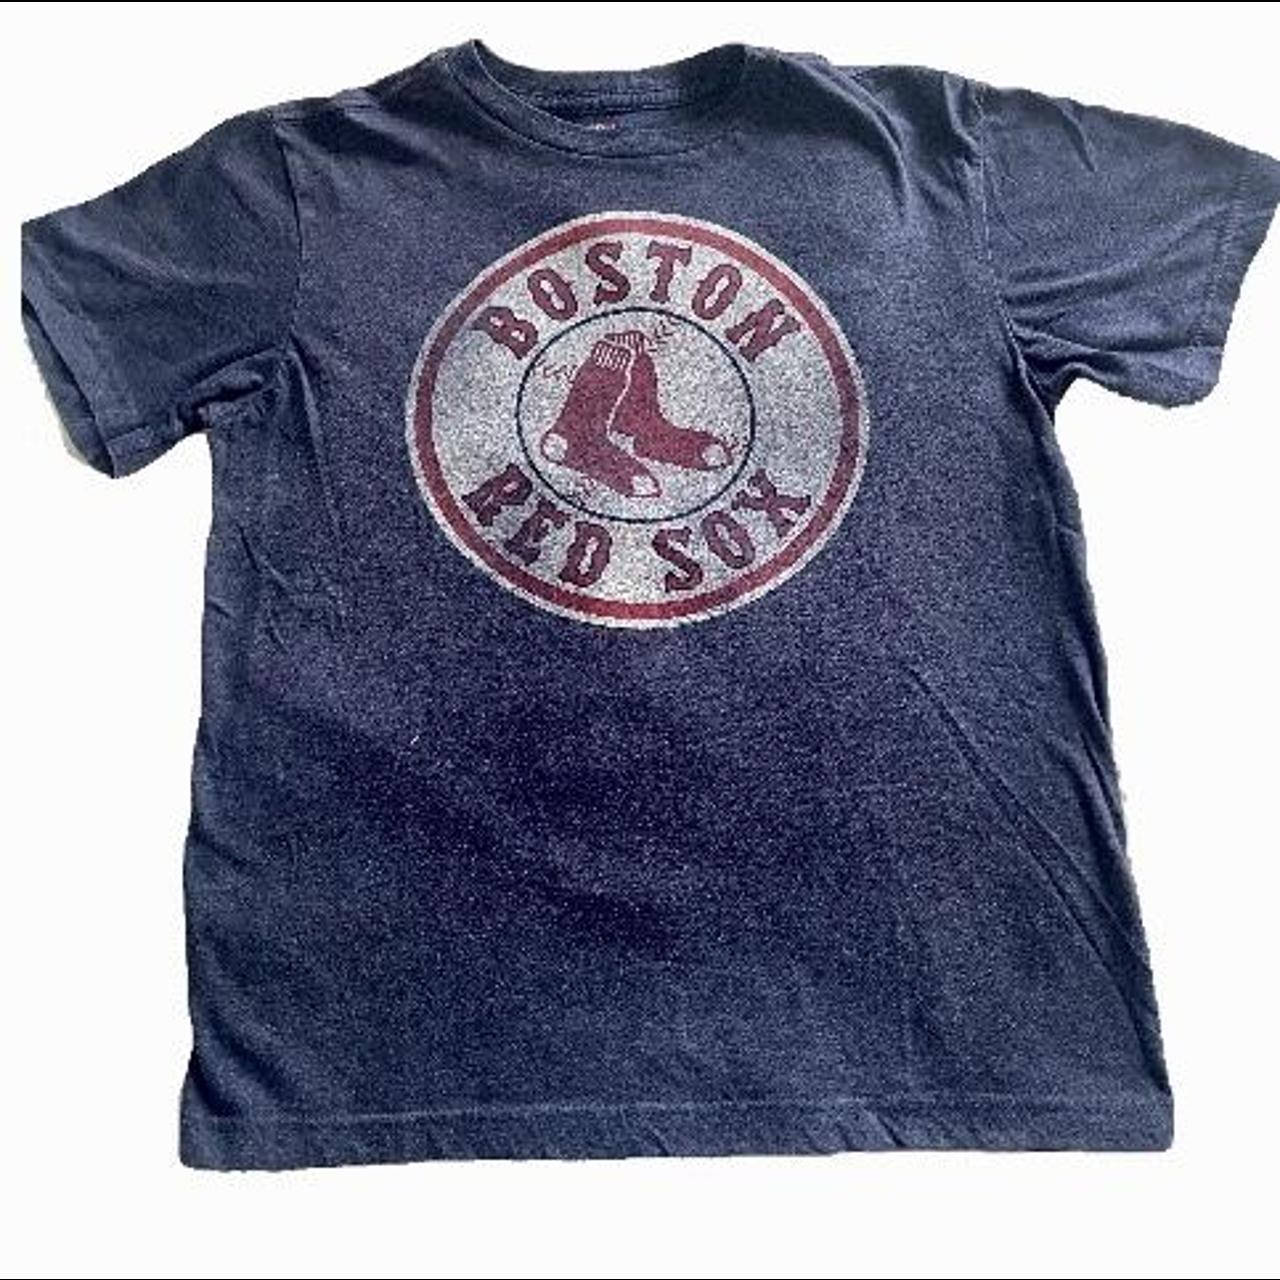 The Awesome Sox Shirt | Youth T-Shirt XS